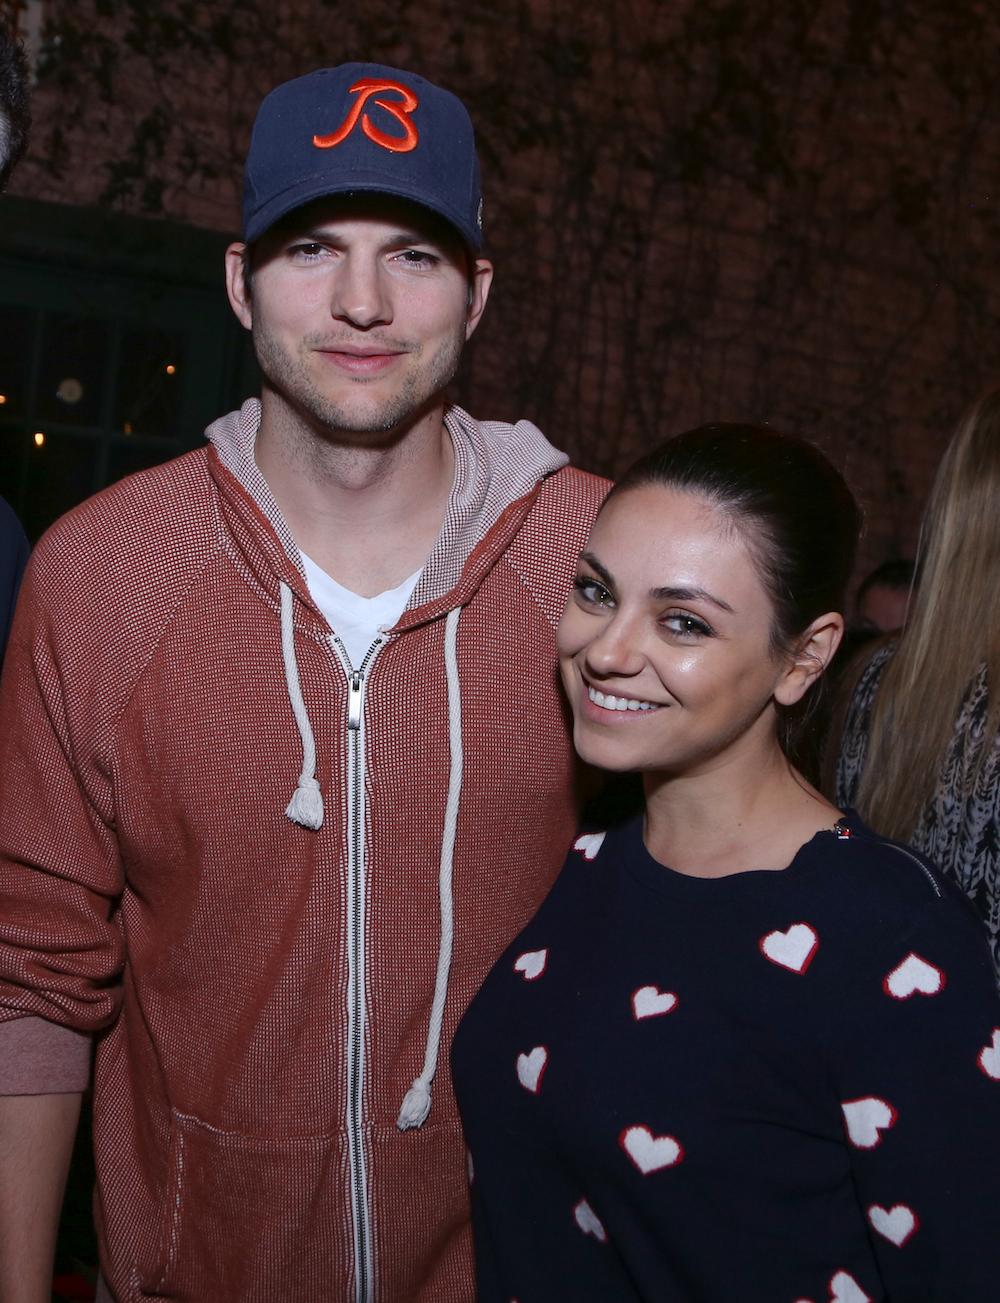 Kutcher and Kunis at the launch of Ashton Kutcher & Guy Oseary's Sound Ventures at SXSW in Austin, Texas, on March 14, 2015 (©Getty Images | <a href="https://www.gettyimages.com.au/detail/news-photo/founder-of-a-grade-investments-guy-oseary-actor-ashton-news-photo/466381066">Anna Webber</a>)